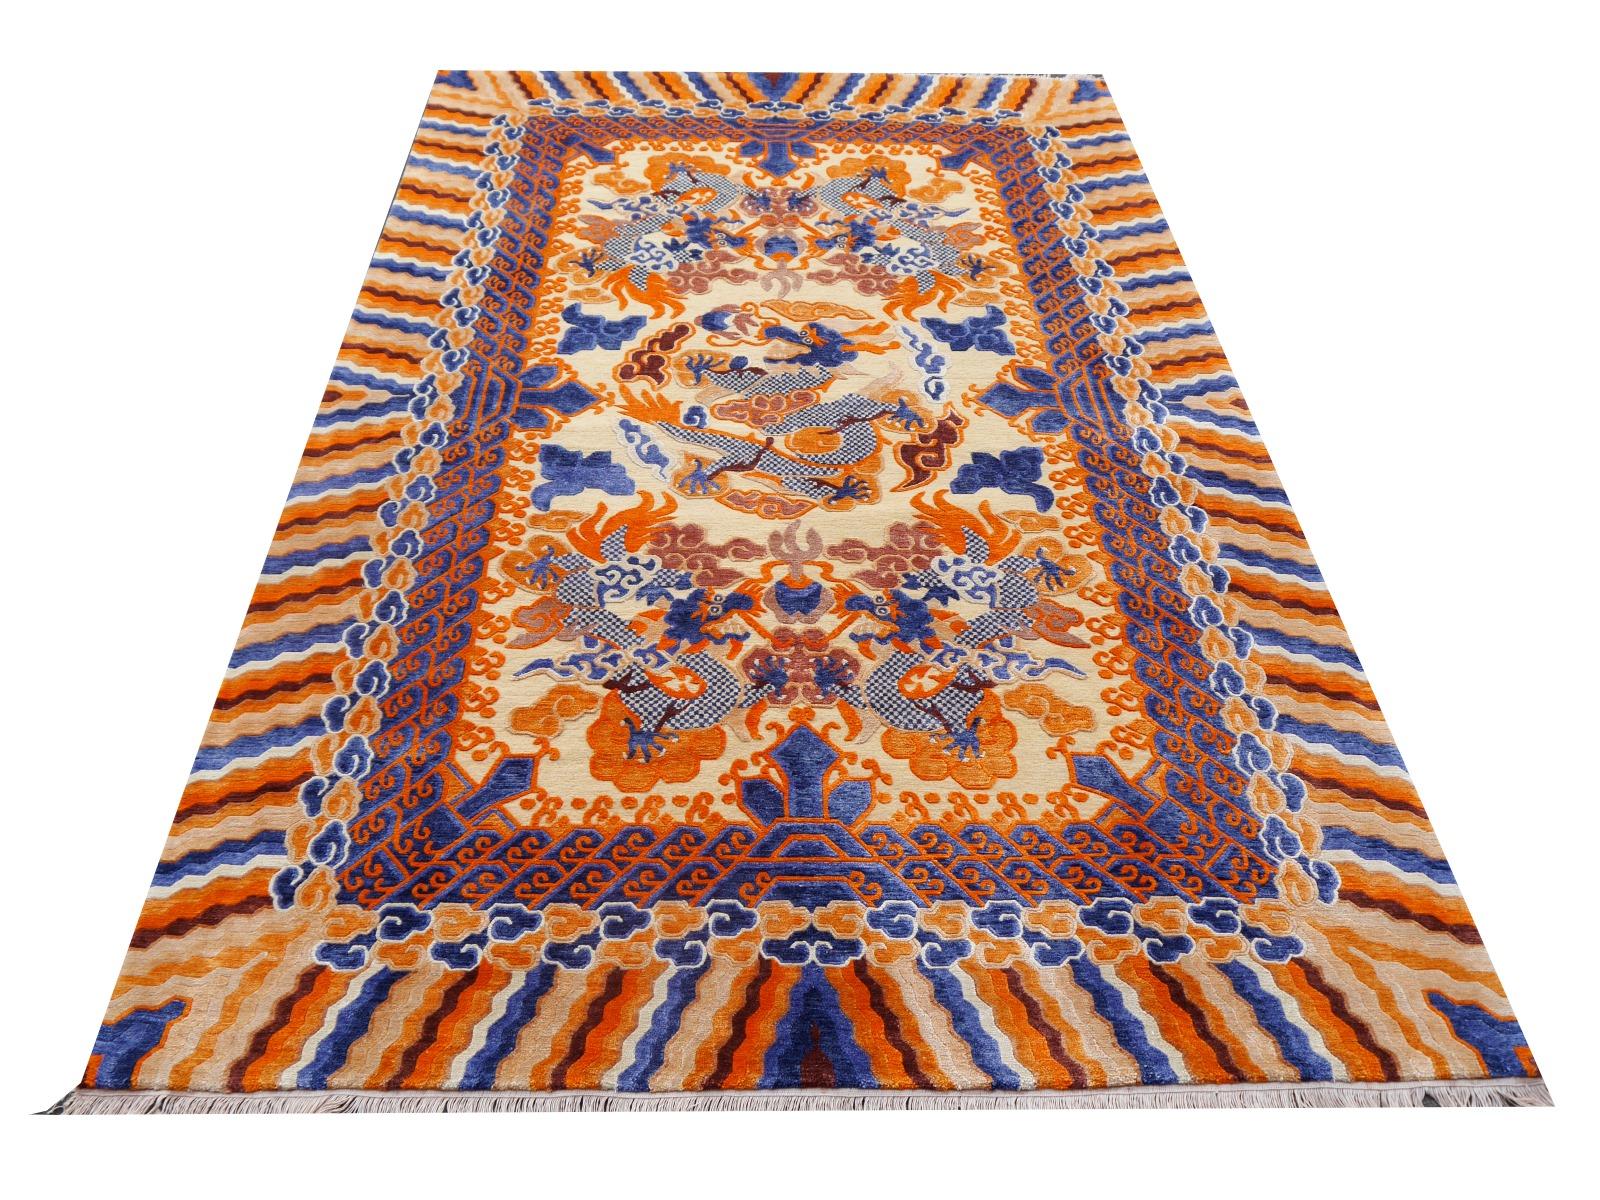 Hand-Knotted Dragon Design Rug Wool and Silk in Style of Chinese Kansu Carpets For Sale